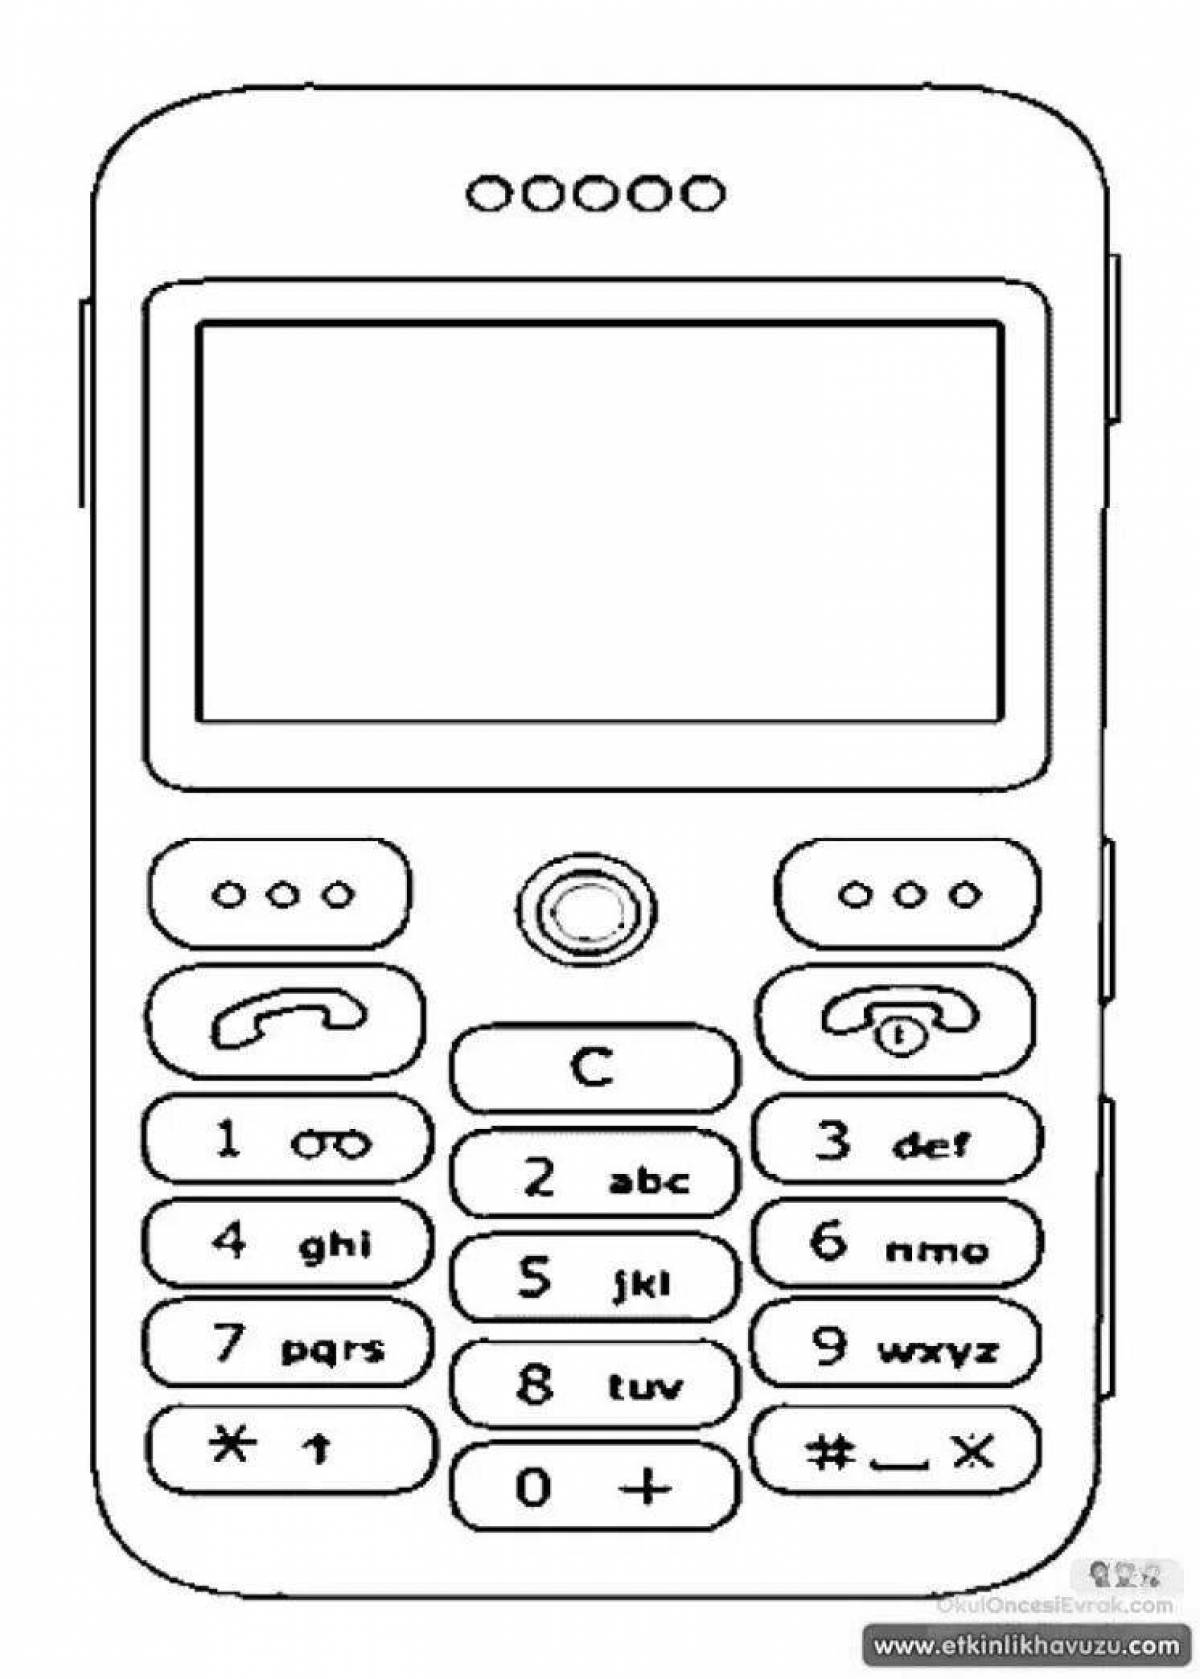 Cute mobile phone coloring page